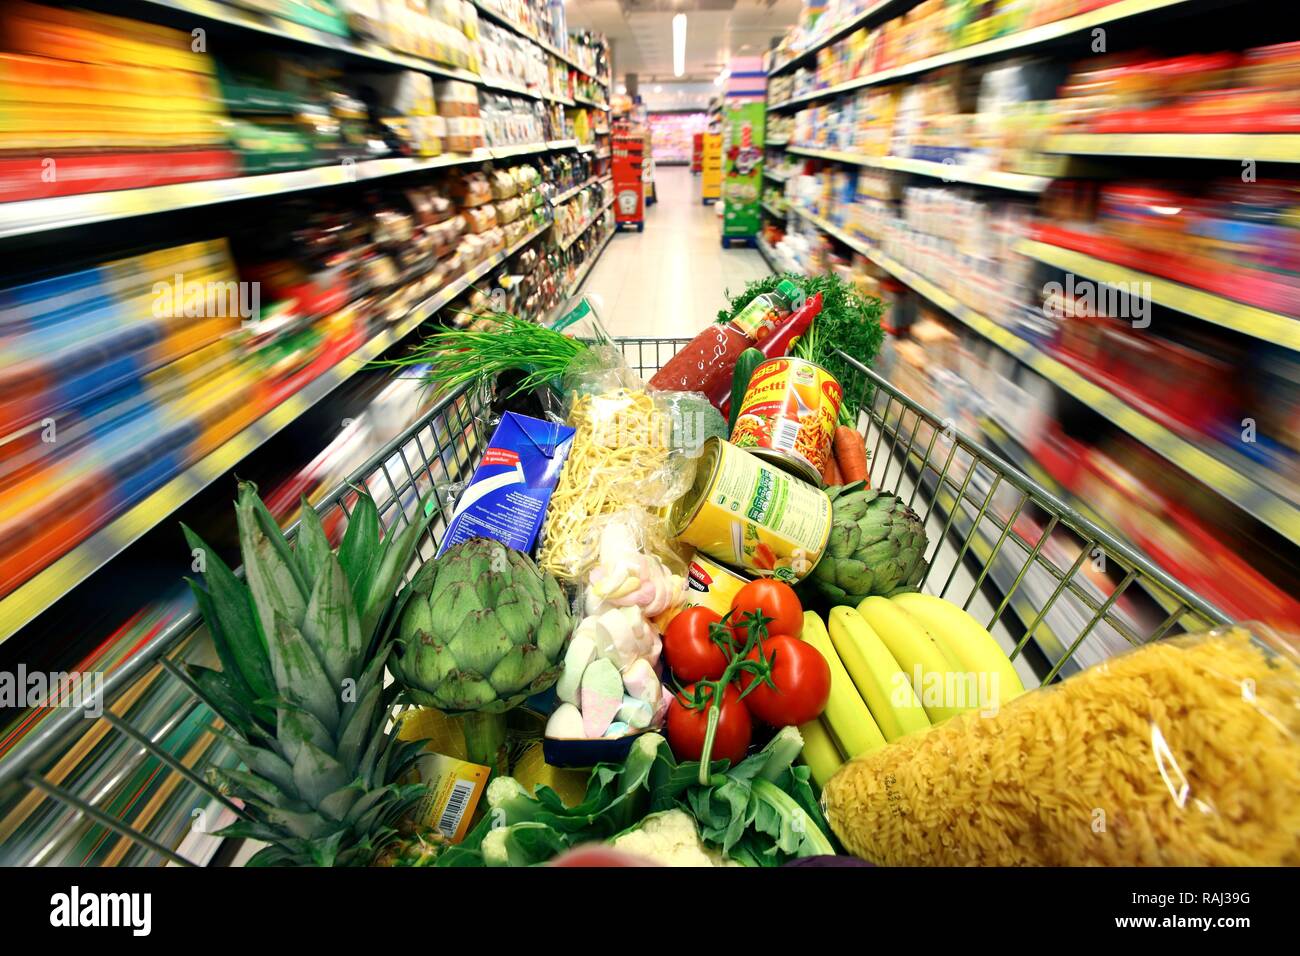 Full shopping trolley being pushed down the aisle, food hall, supermarket Stock Photo